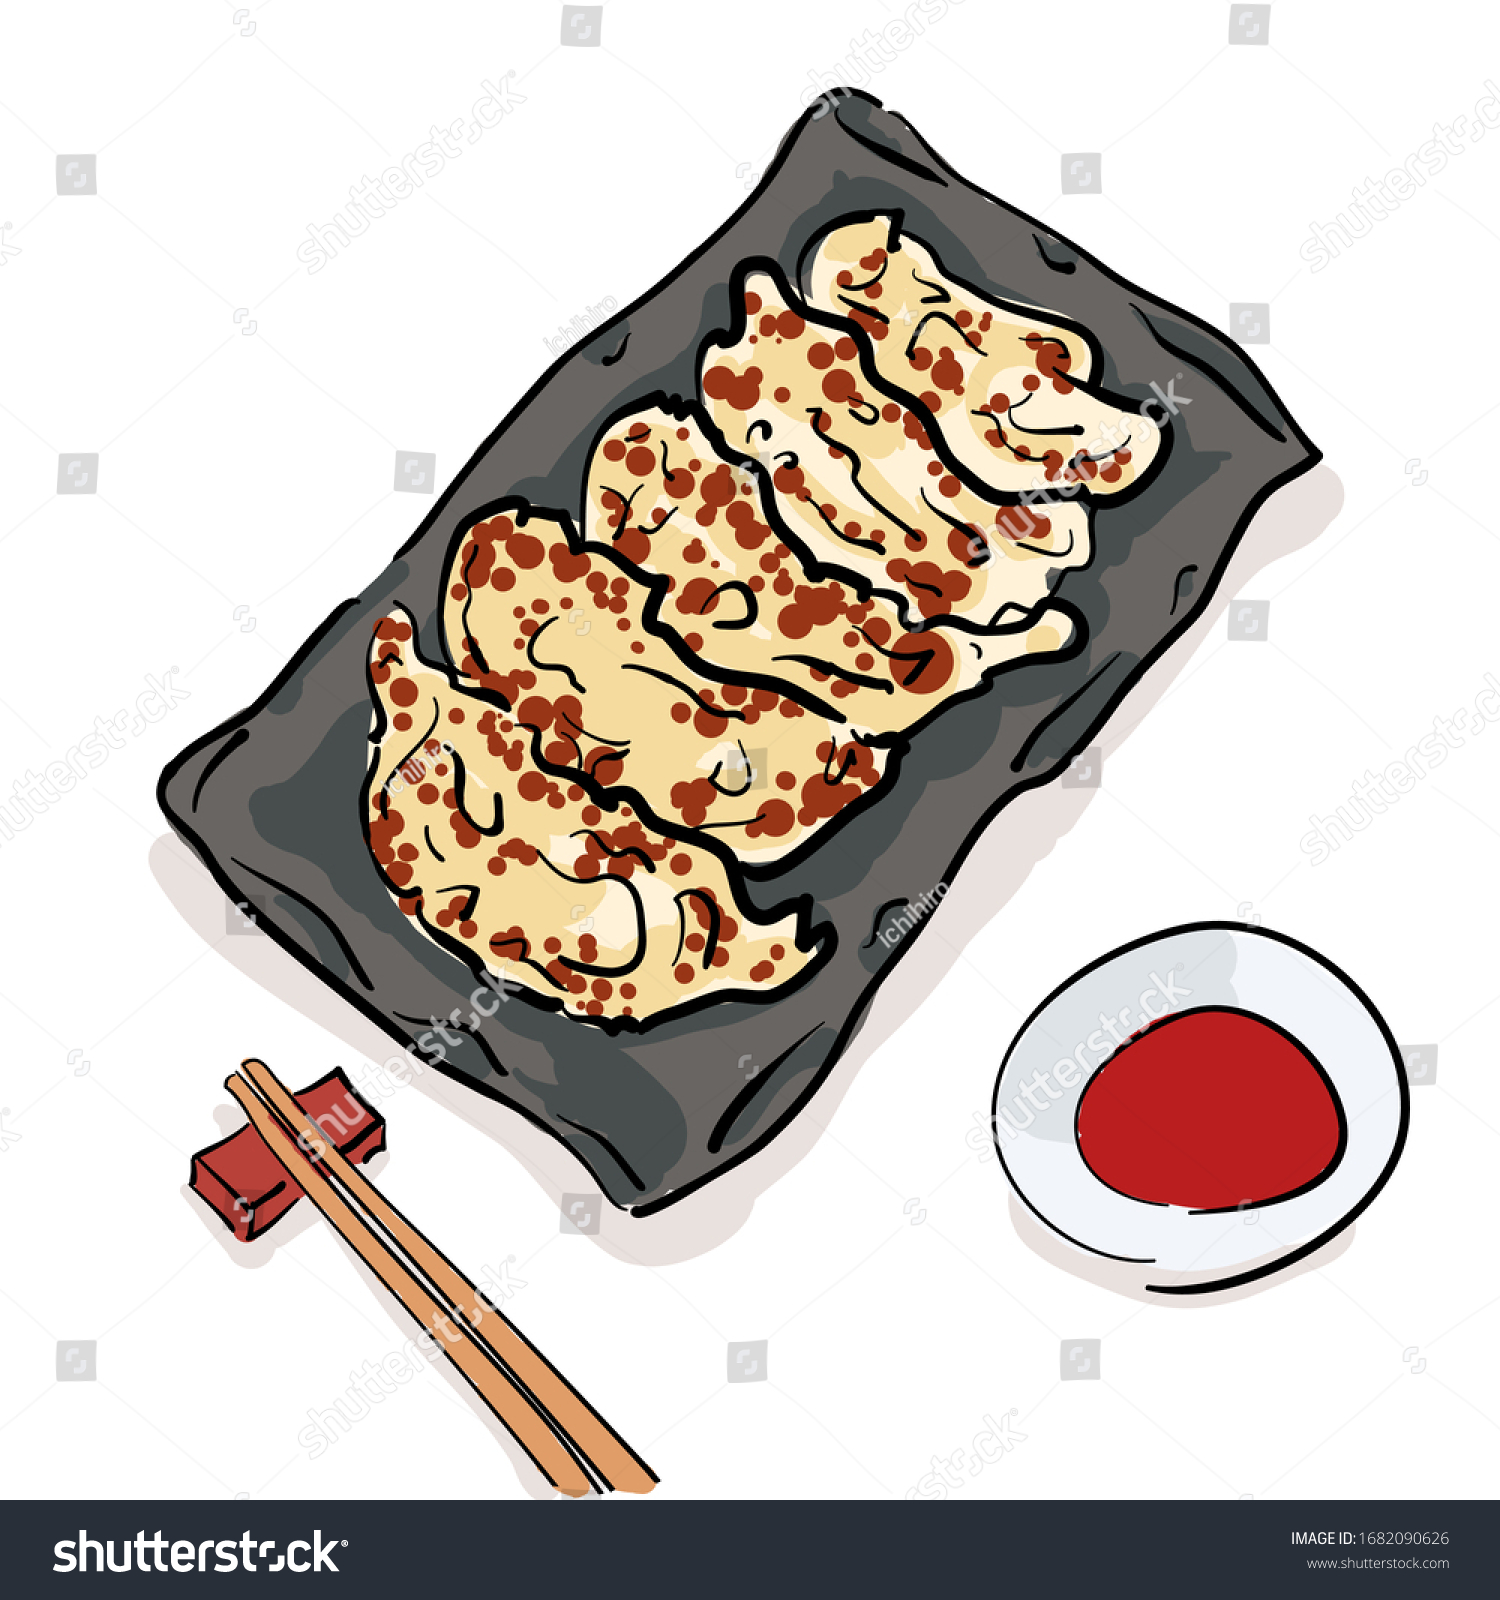 Fried Dumplings Drawn By Hand Stock Vector Royalty Free 1682090626,Whiskey Sour Recipe No Egg